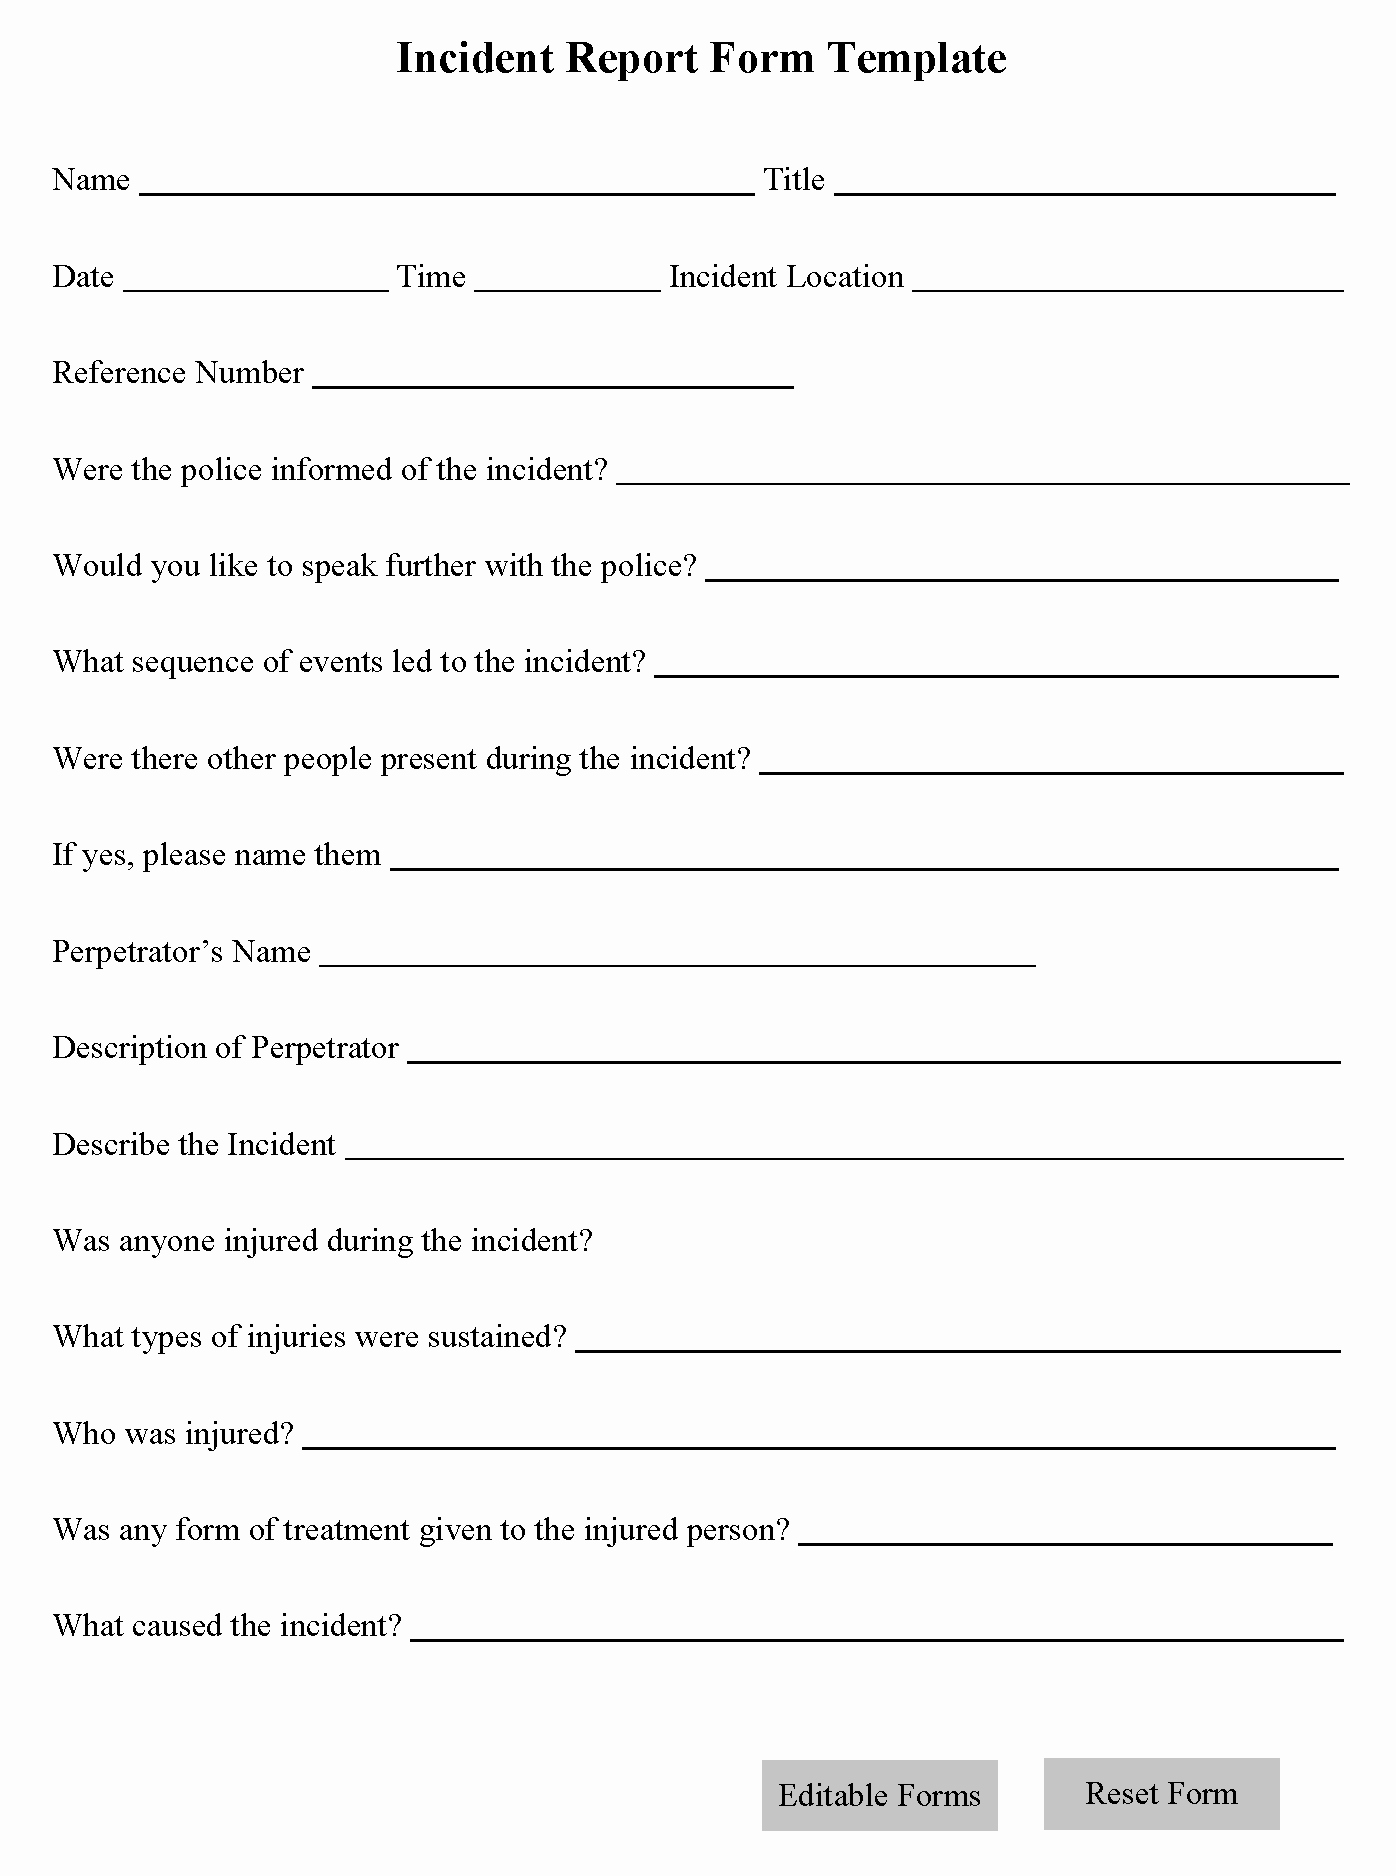 Incident Report form Template